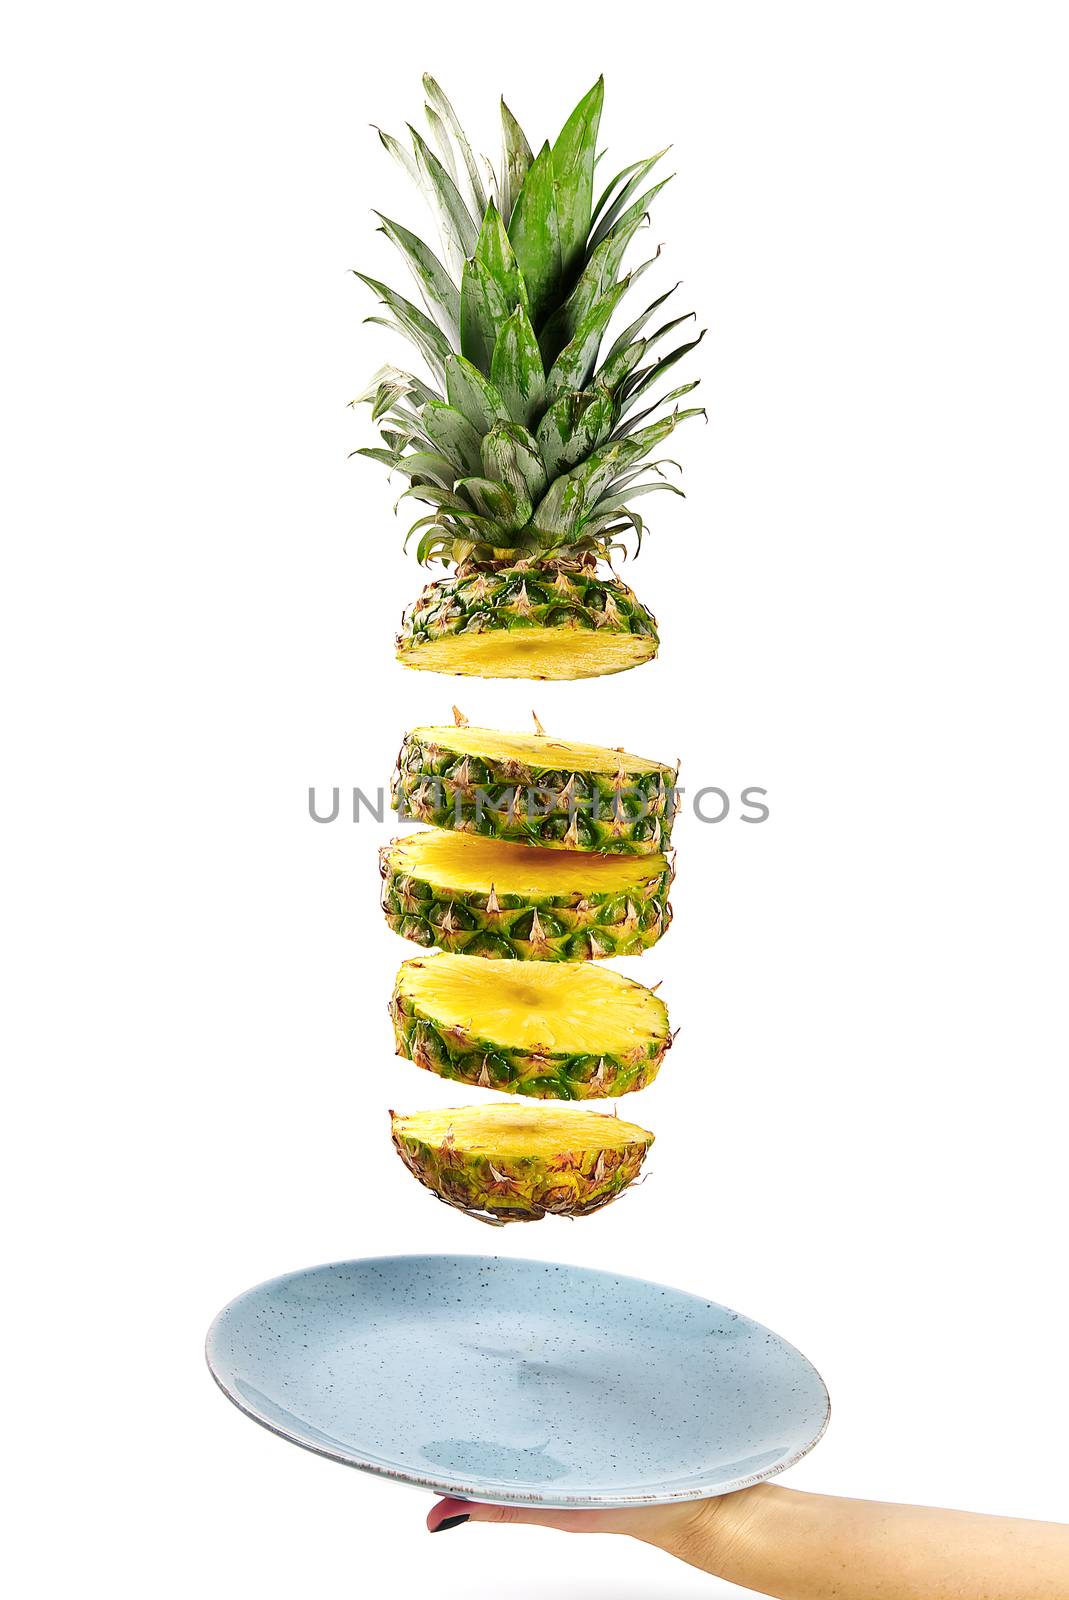 Pineapple fresh ananas. Pineapple sliced, levitates in the air. Concept of summer mood on white background, isolate. Tropical fruit. by PhotoTime